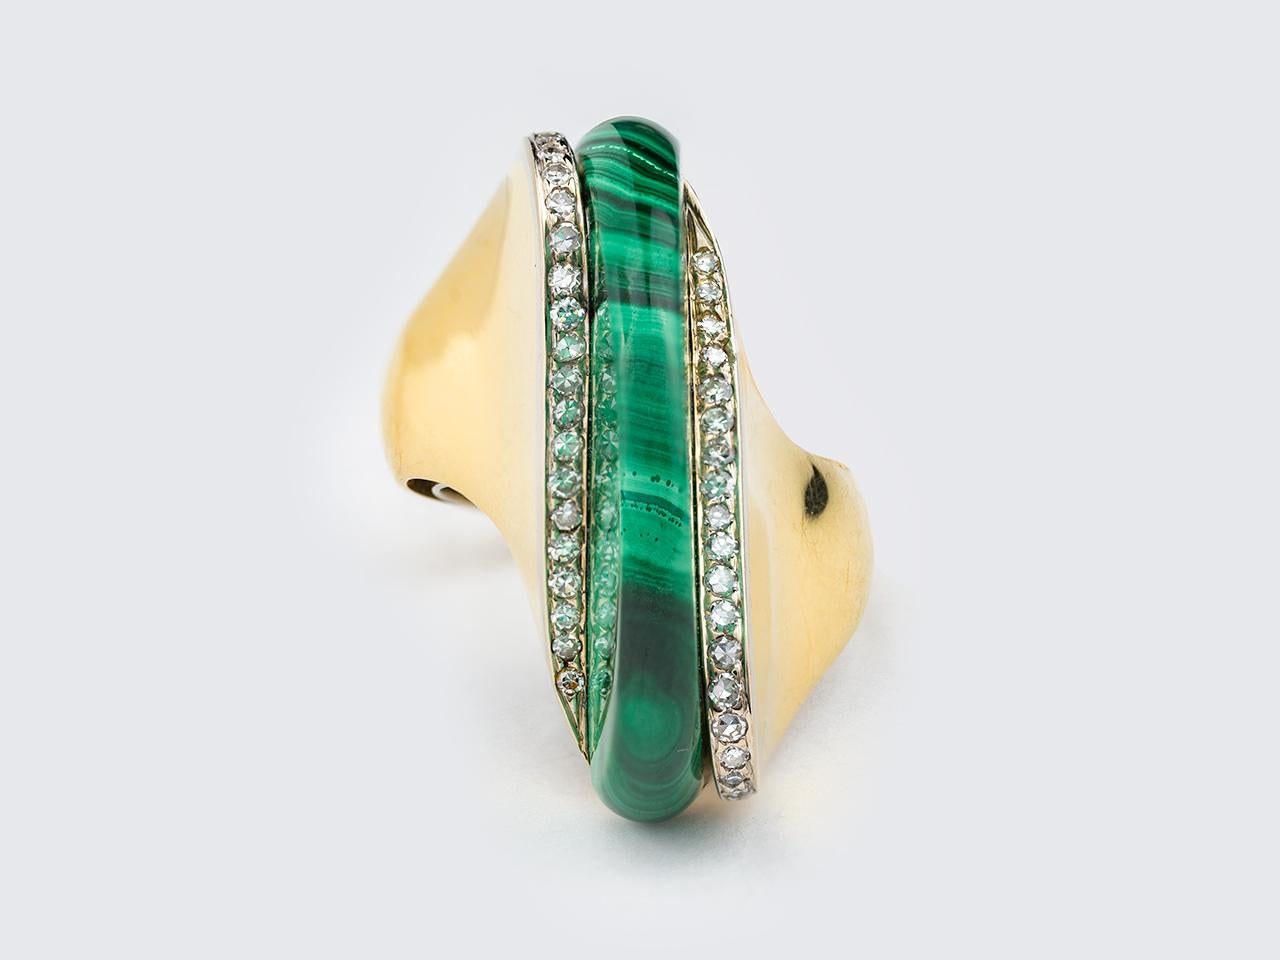 18kt gold Modernist ring, centering a fine cut Malachite stone, with diamond accents. 18kt.